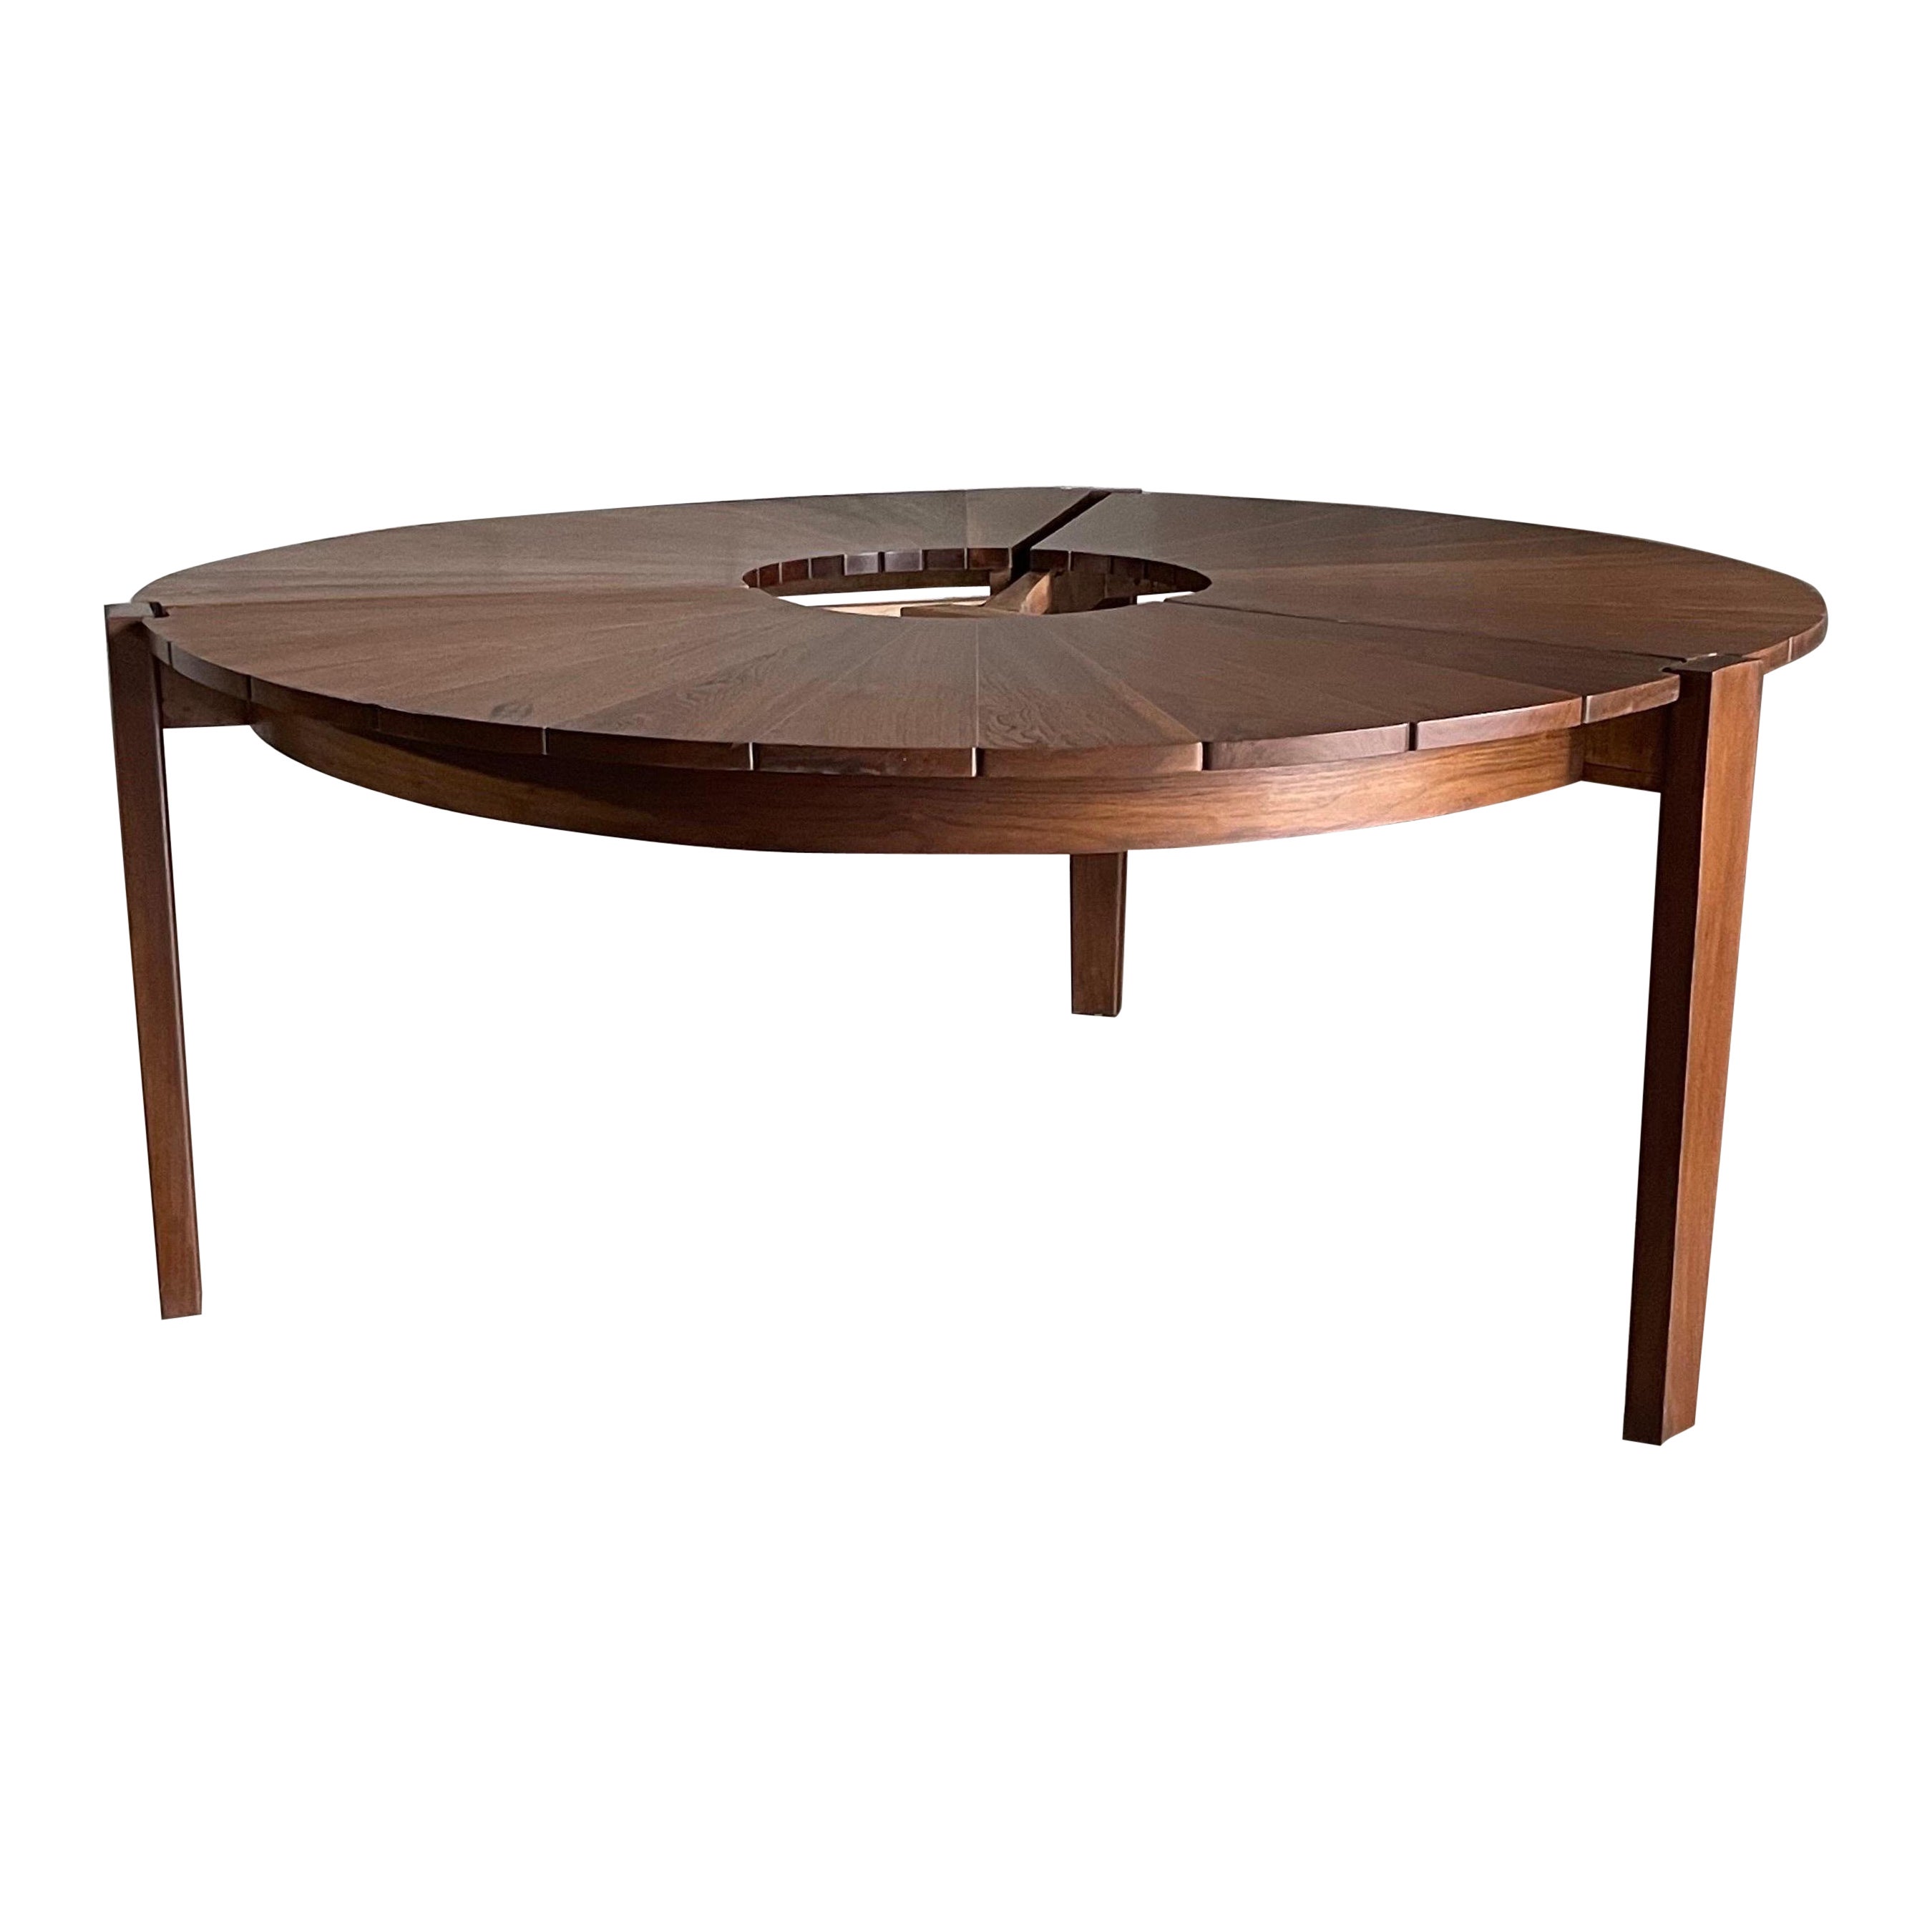 Studiocraft Round Petal Dining Table in Walnut and Maple, Charles Faucher 1975 For Sale